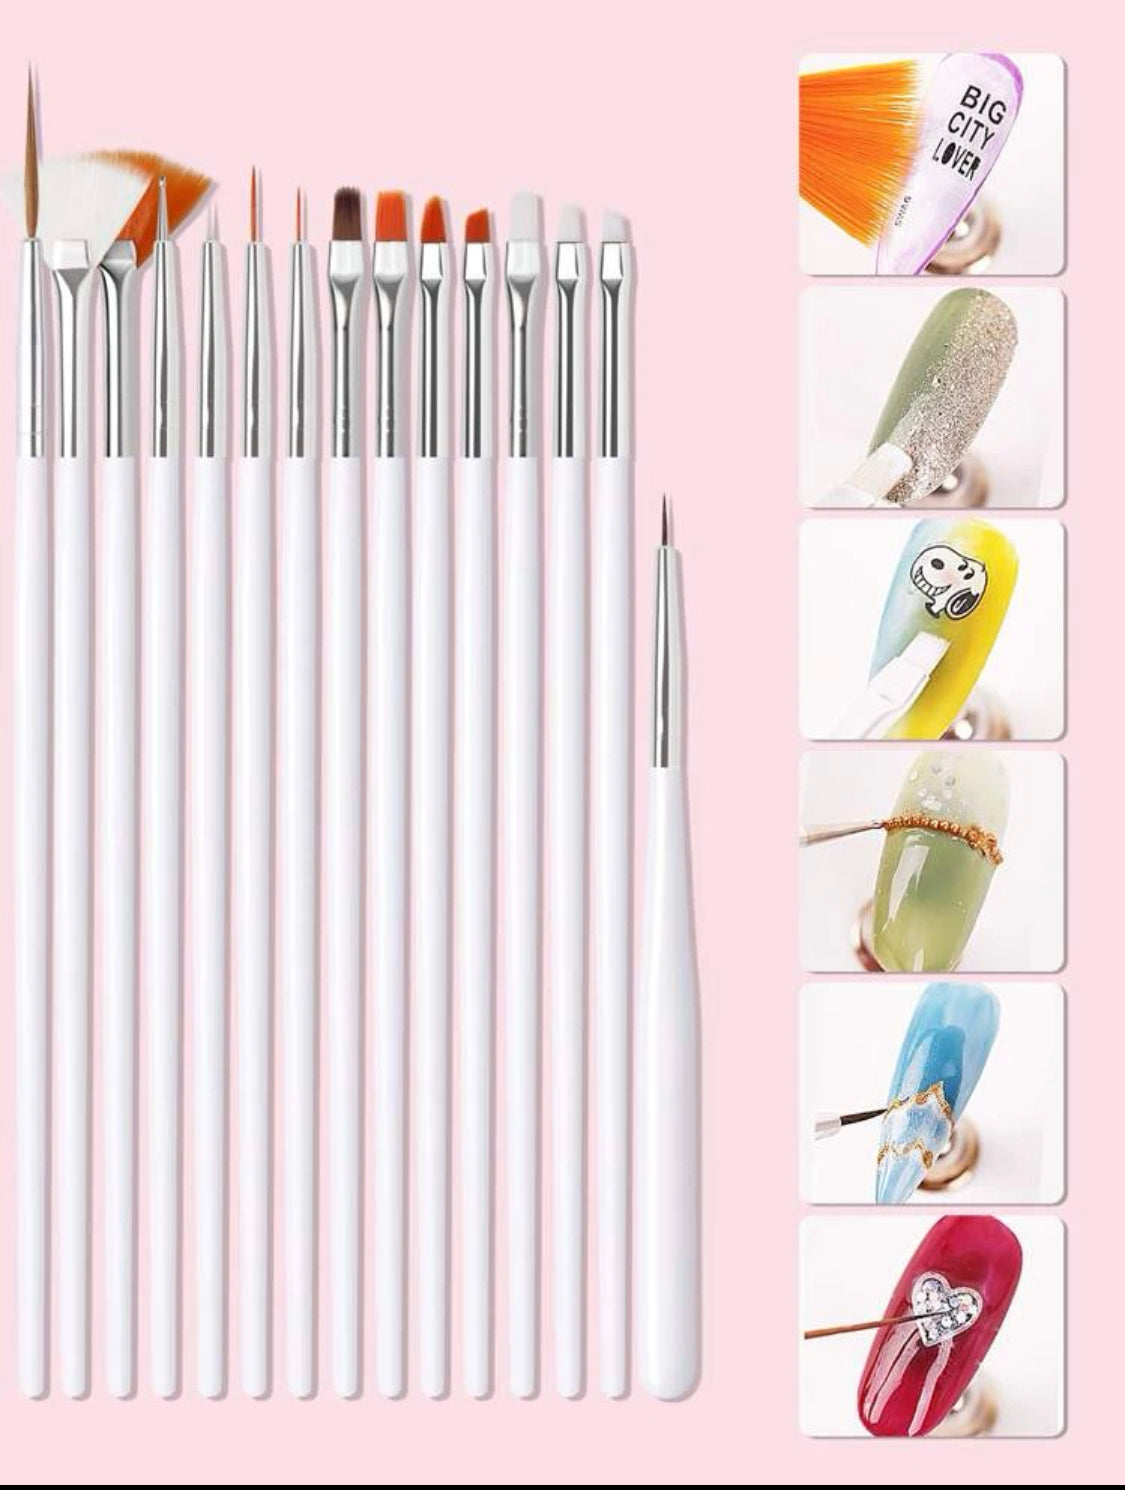 Professional 29 pcs Nail Art Tool Set with artificial practice fingers